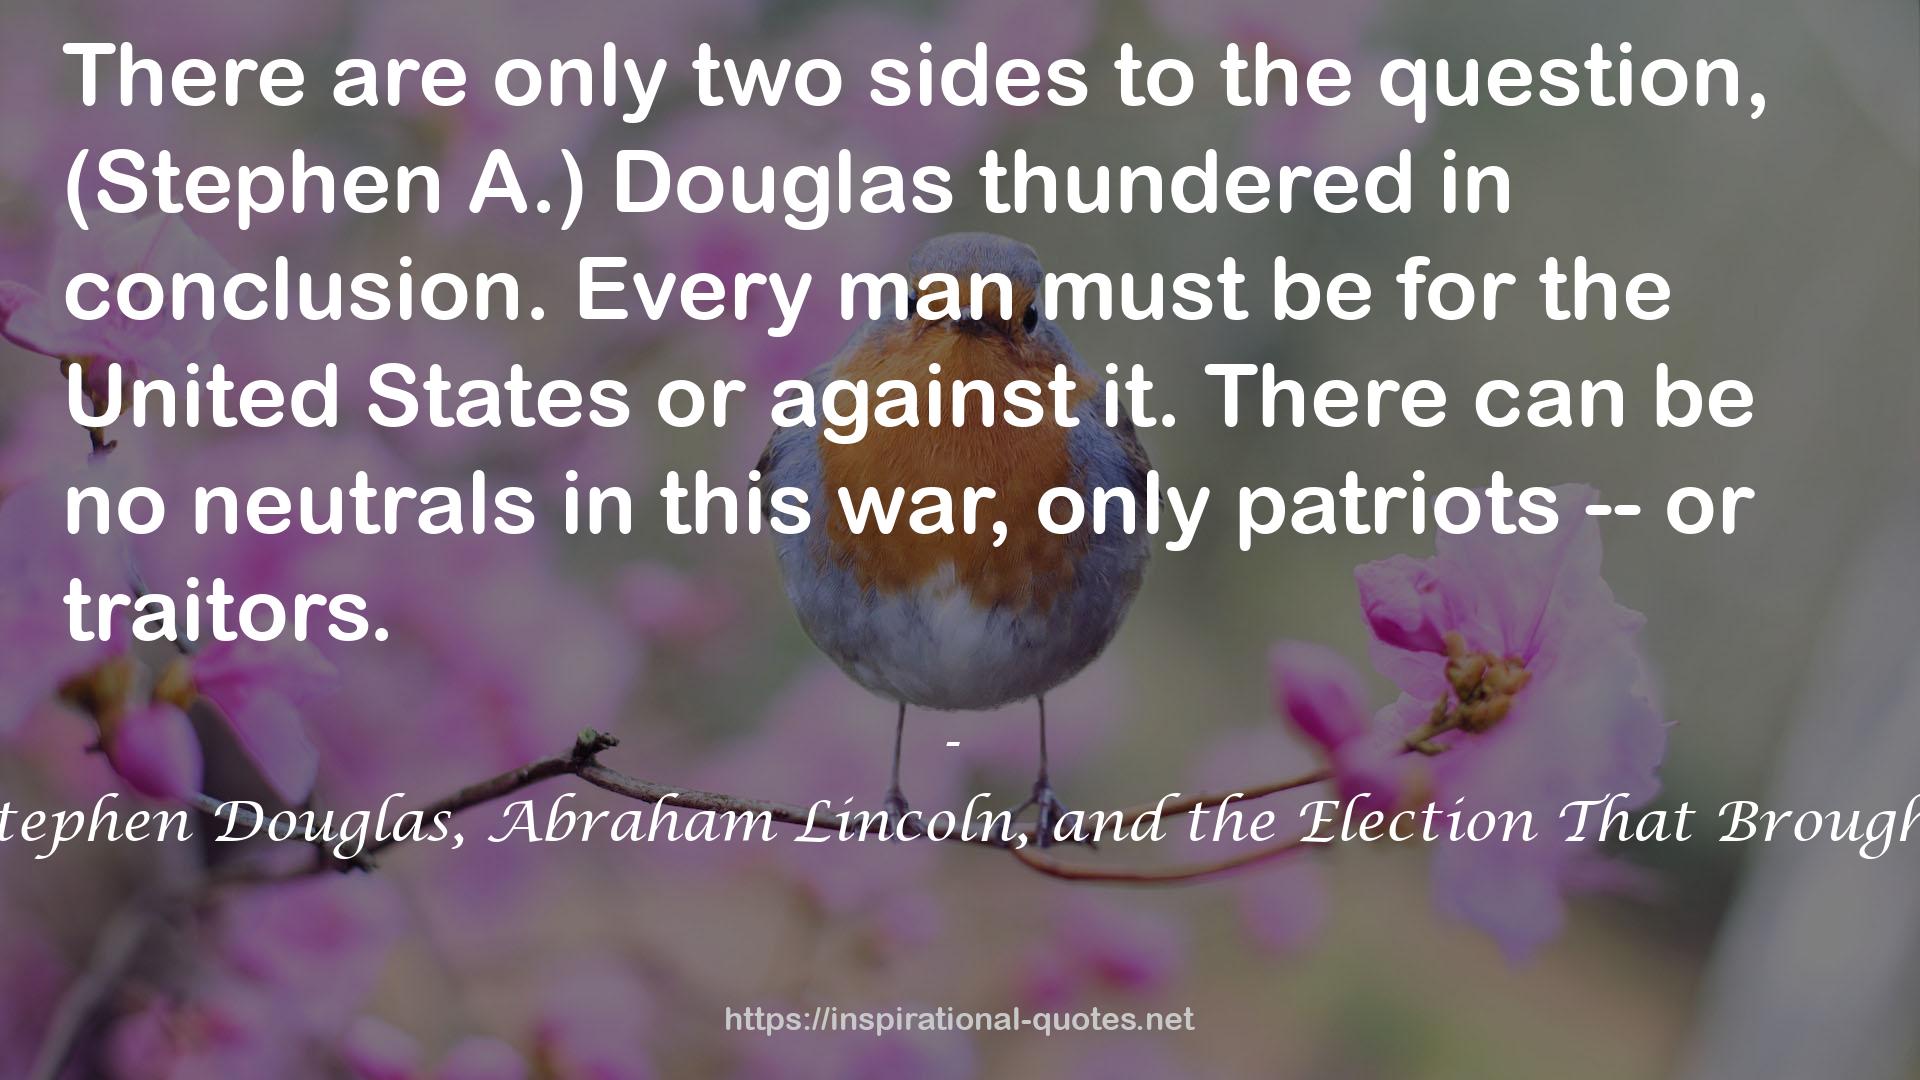 Year of Meteors: Stephen Douglas, Abraham Lincoln, and the Election That Brought on the Civil War QUOTES